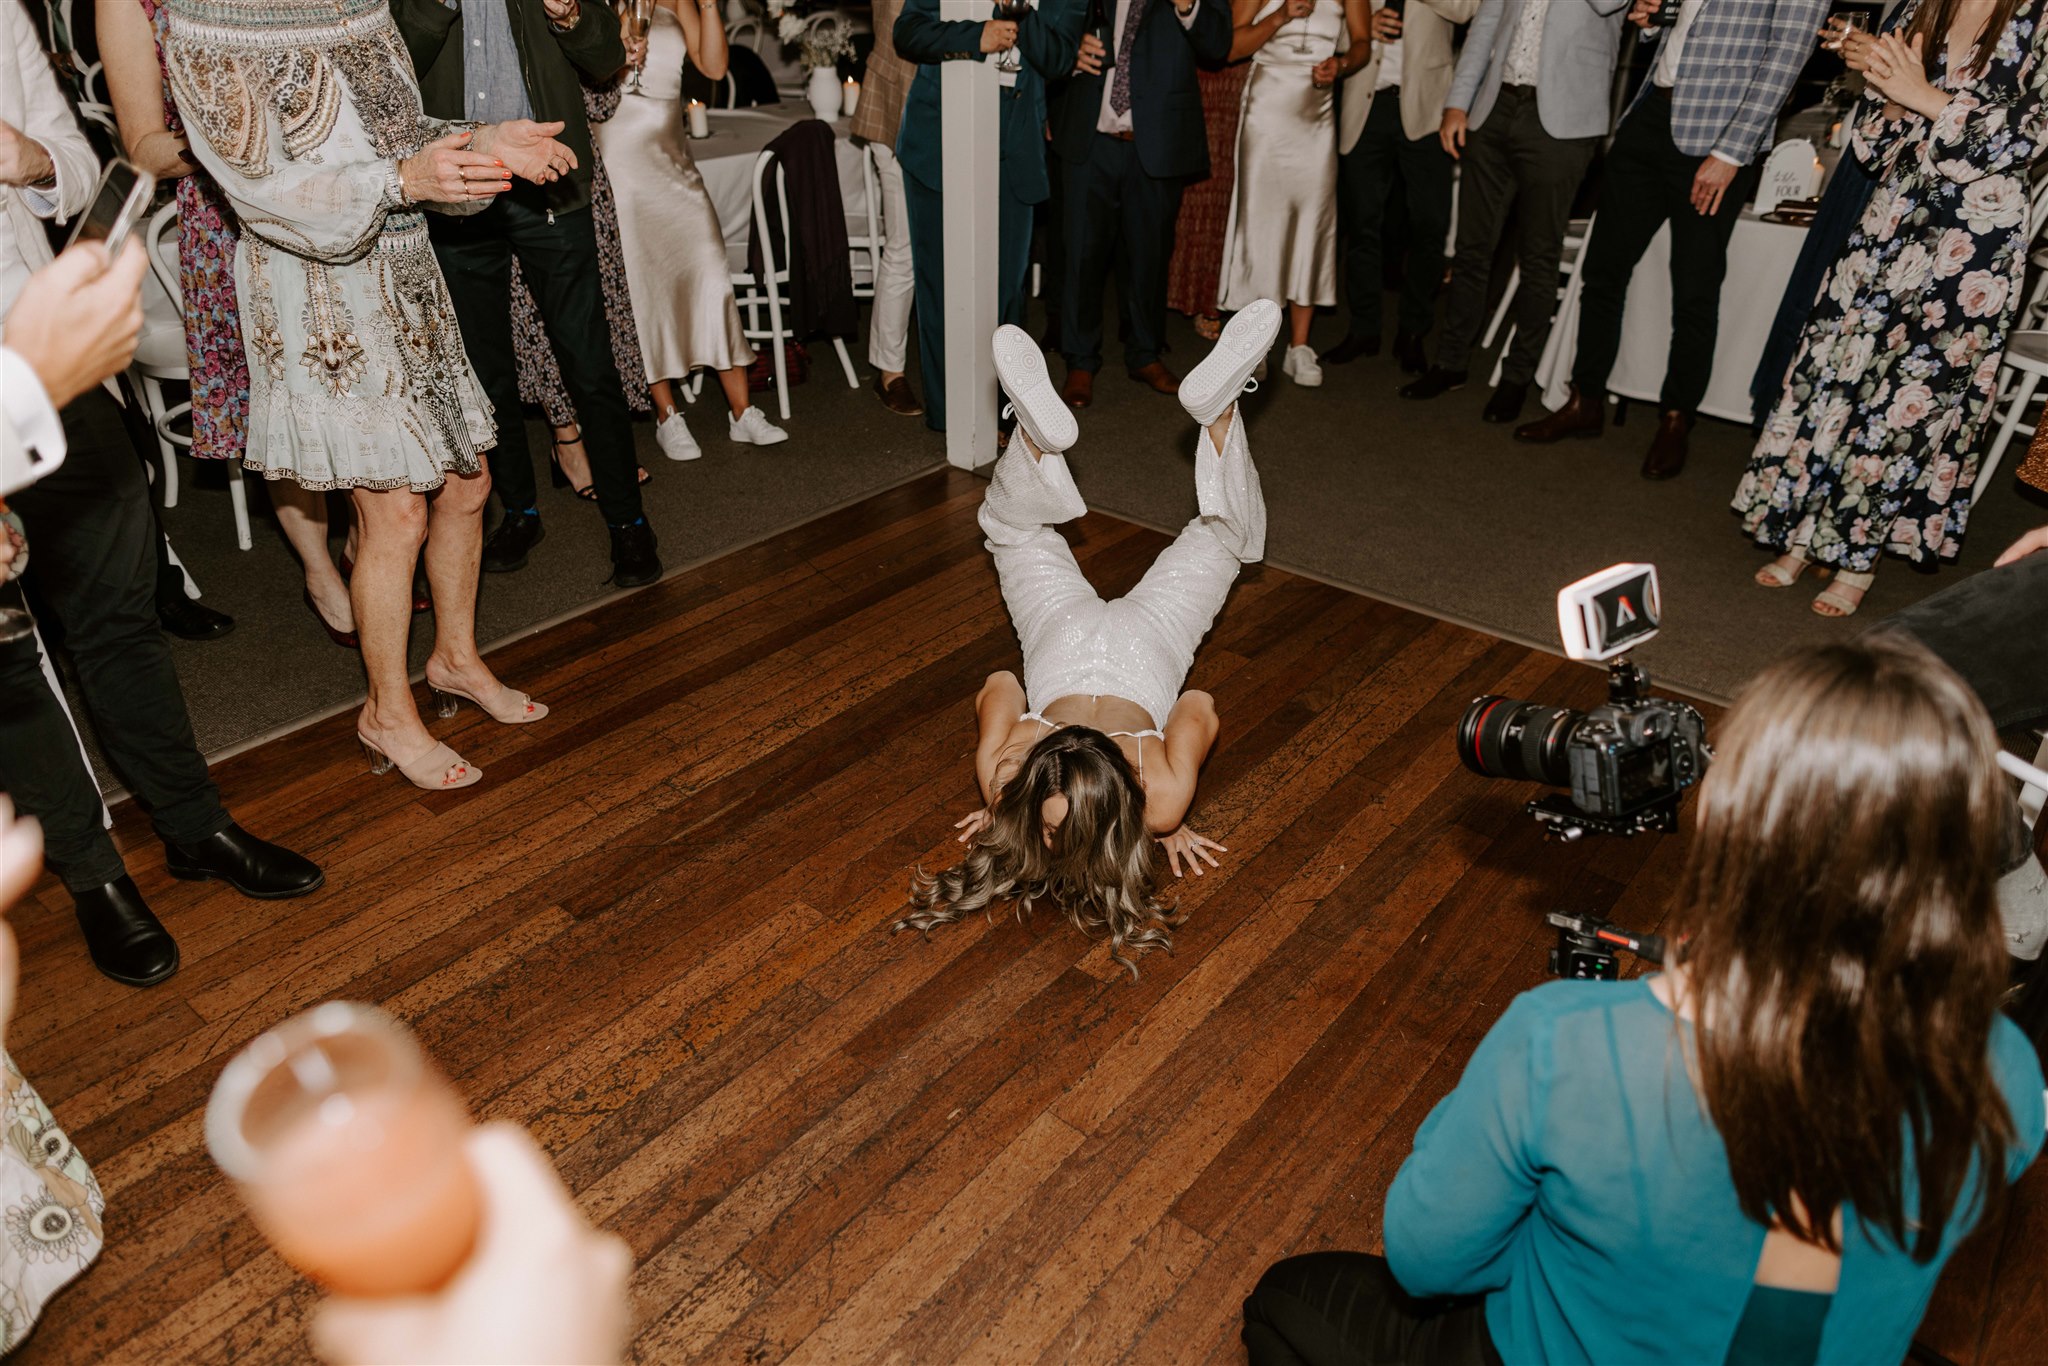 sunshine coast wedding images by albert and wild photoography